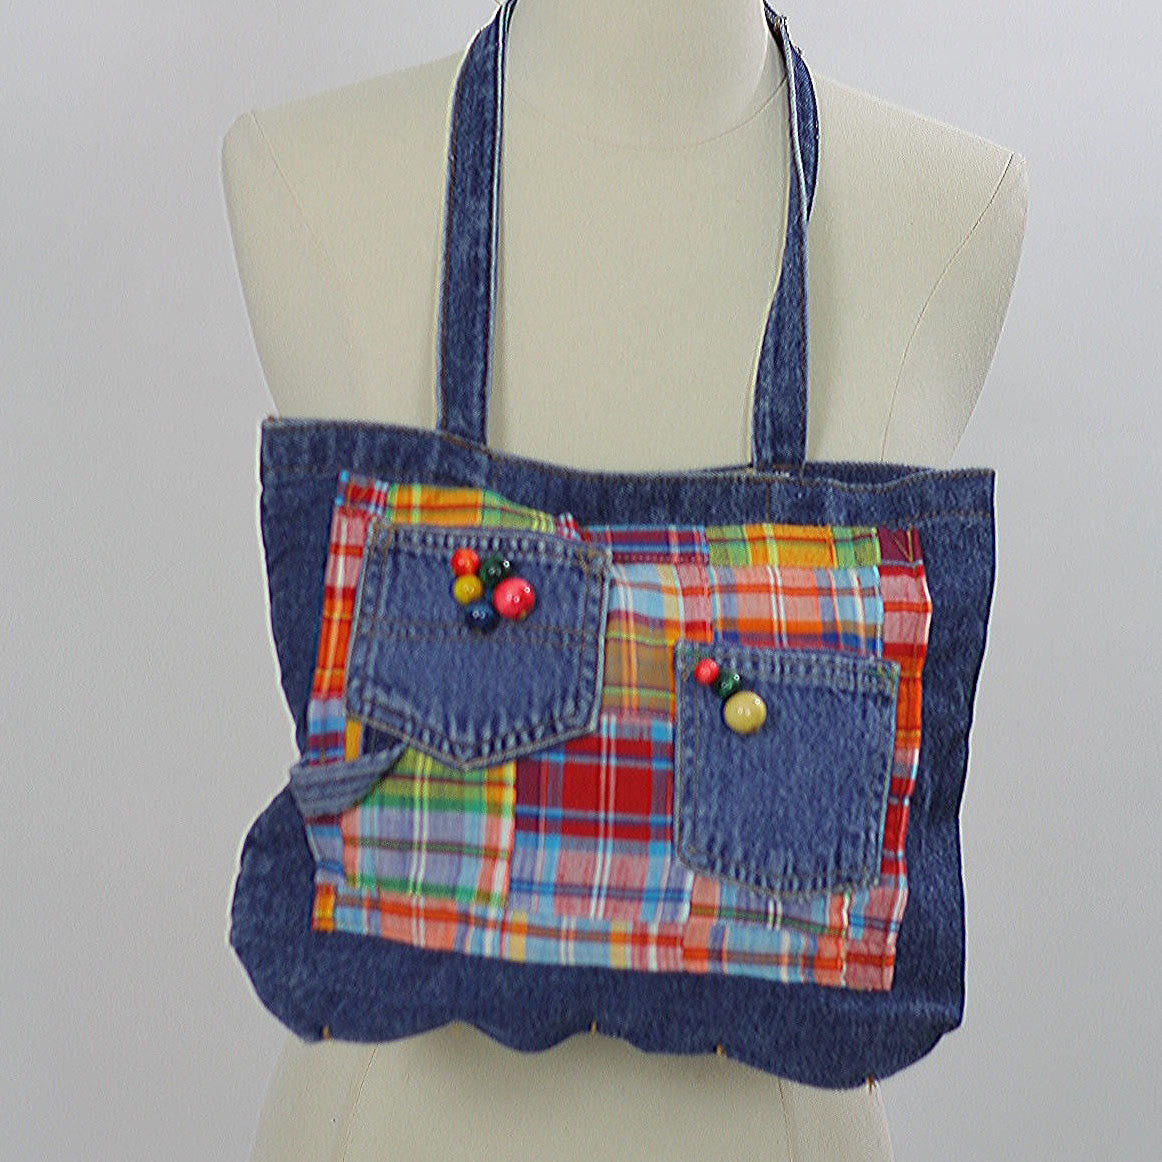 UNIQUE HANDMADE JEANS BAG - Corner under the lucky star